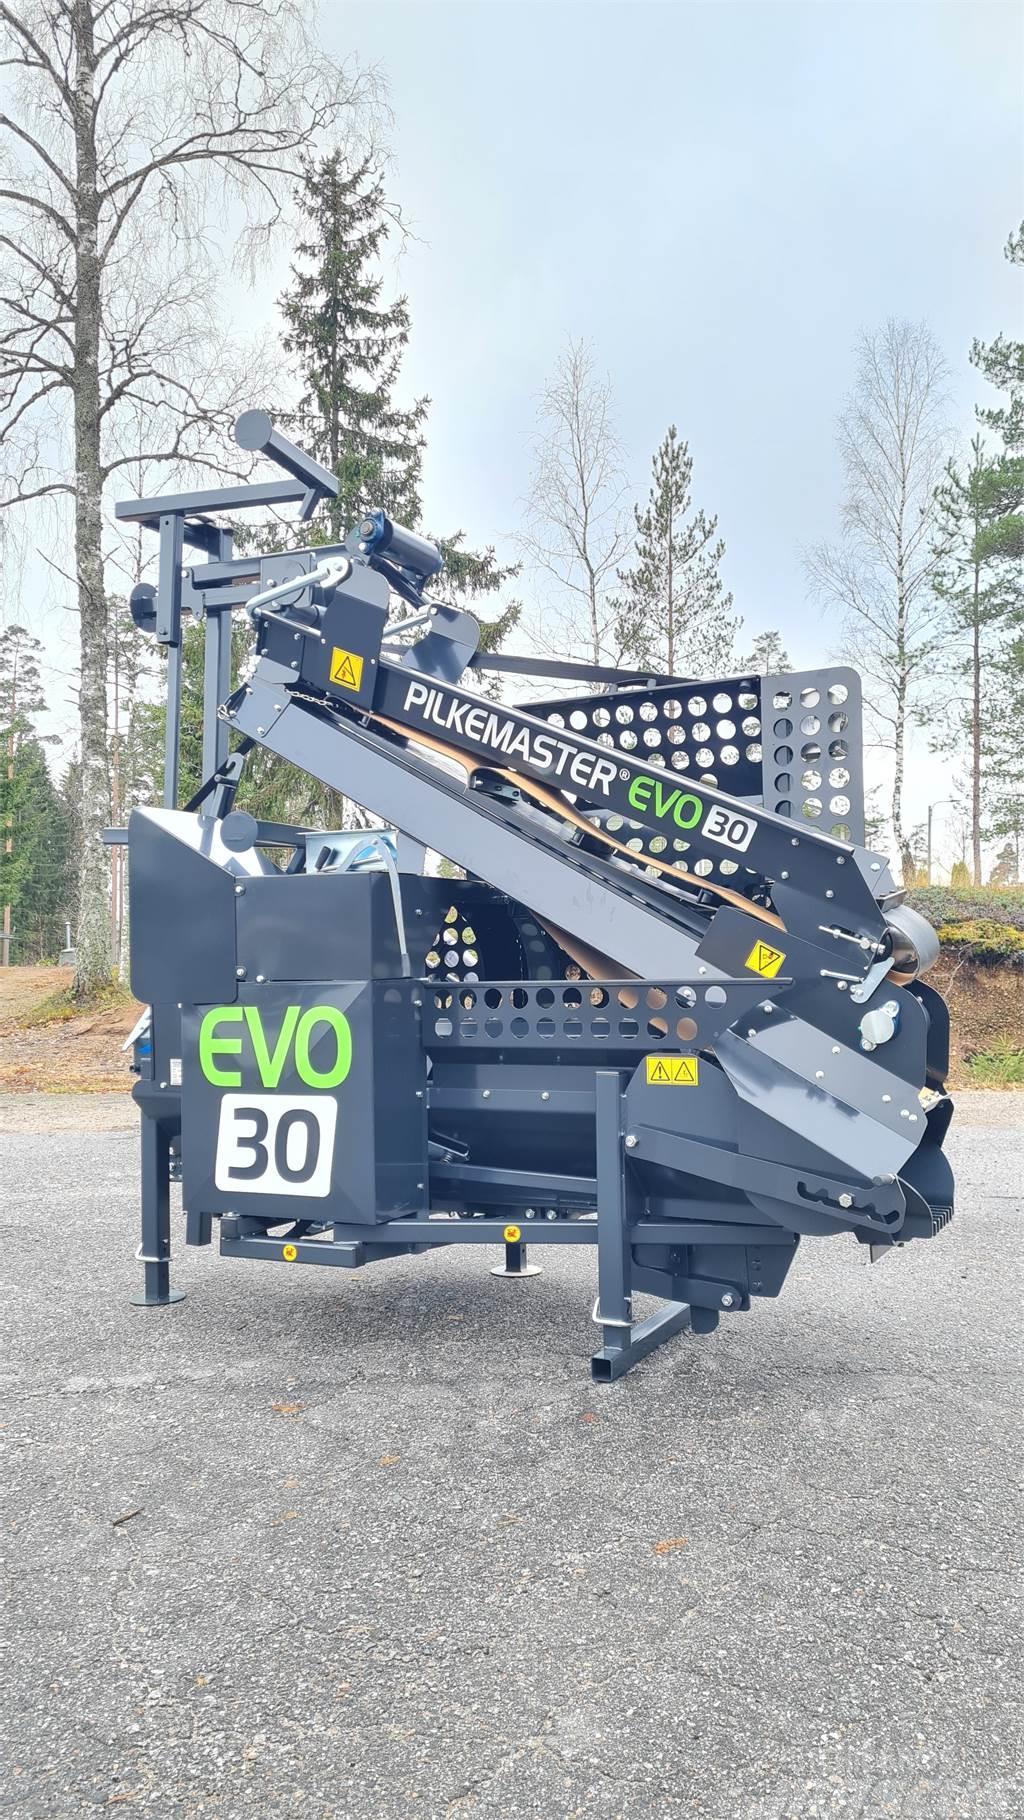 Pilkemaster Vedmaskin EVO 30 TR Wood splitters, cutters, and chippers